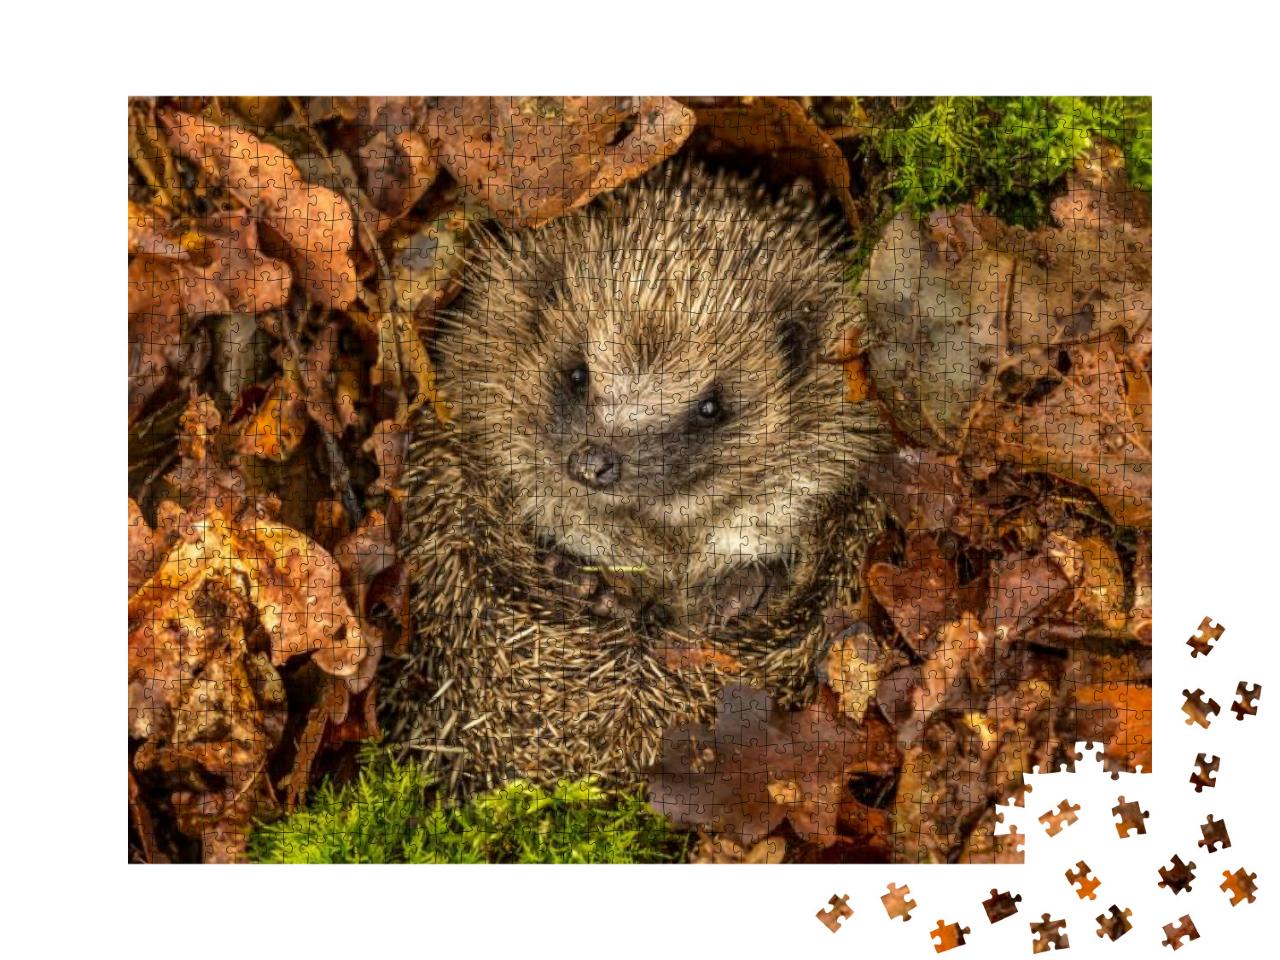 Hedgehog, Wild, Native, European Hedgehog in Natural Wood... Jigsaw Puzzle with 1000 pieces